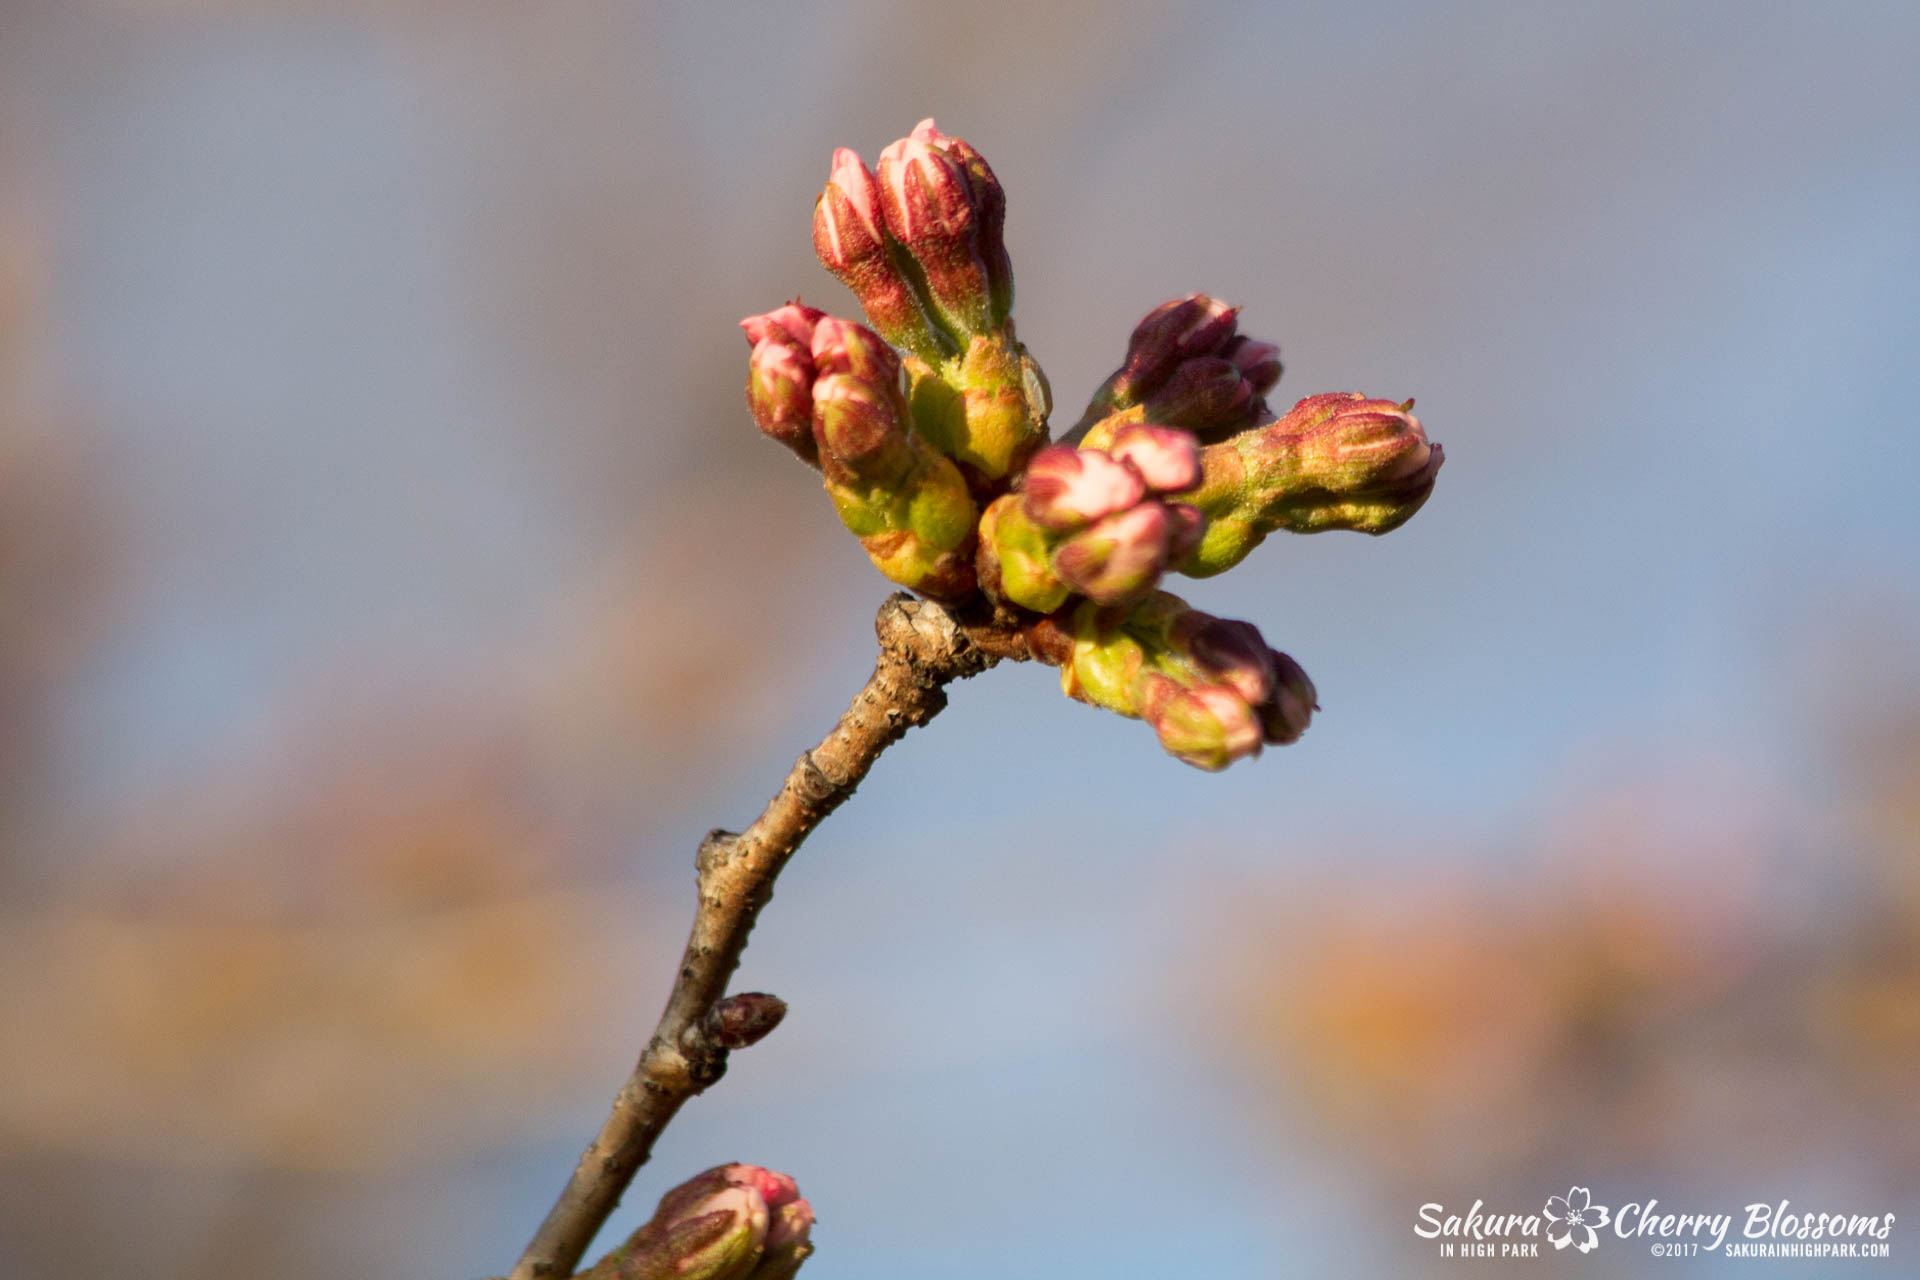 Sakura-in-High-Park-April-17-2017-florets-are-emerging-from-the-buds-throughout-the-park-58.jpg